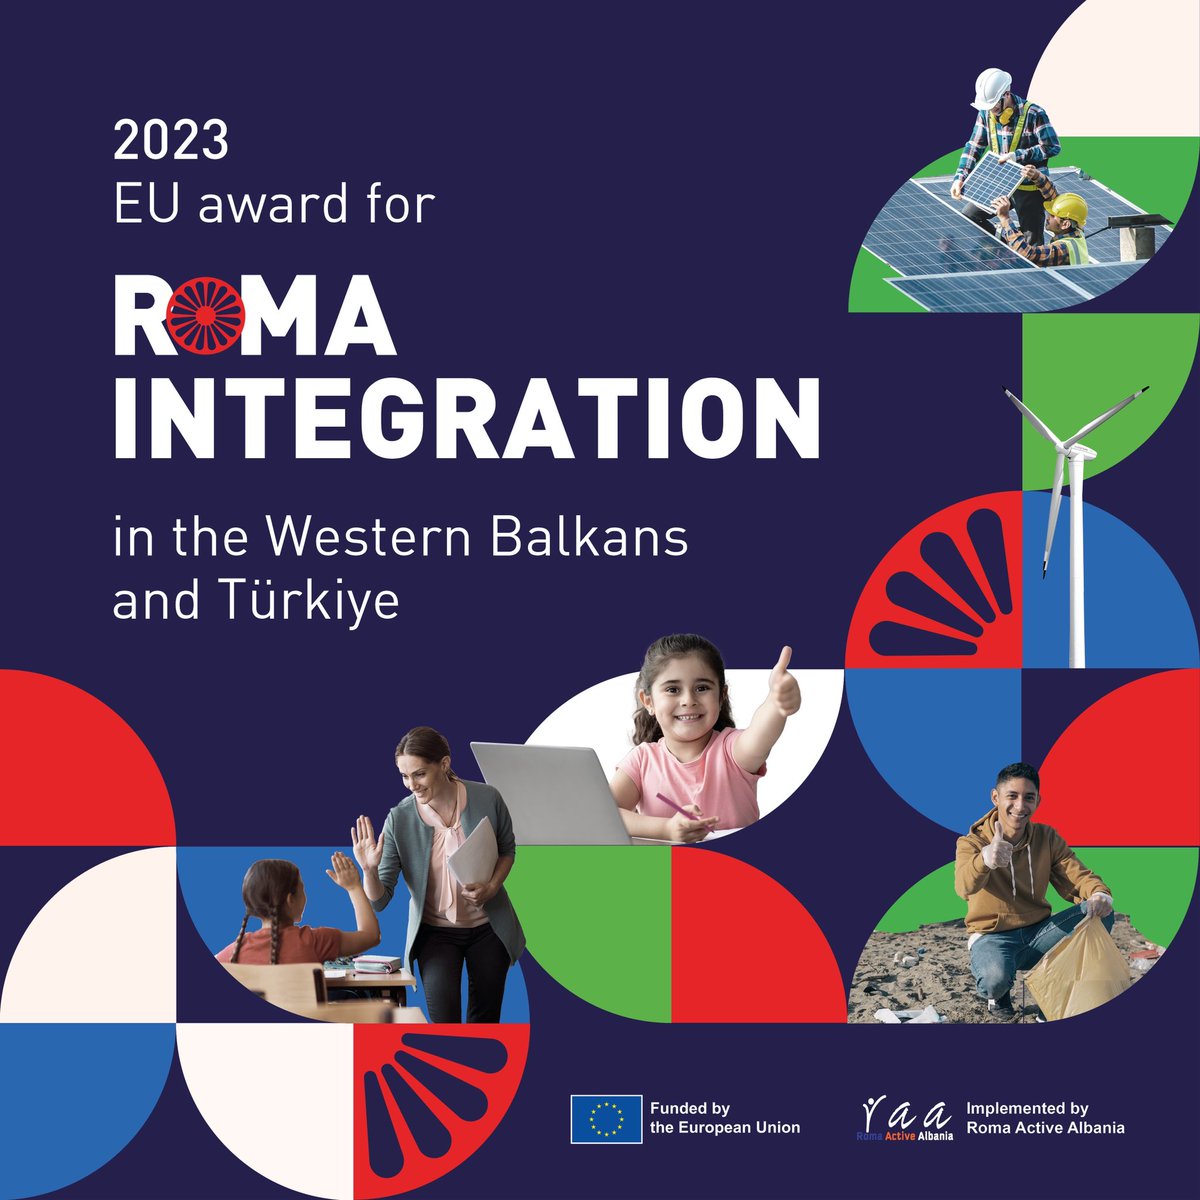 An interesting call for #NGOs in #WesternBalkans  and #Türkiye to enhance the role of Roma in both implementing and benefitting from the green economy and #digital agenda. https://t.co/w3kGvI1i1r